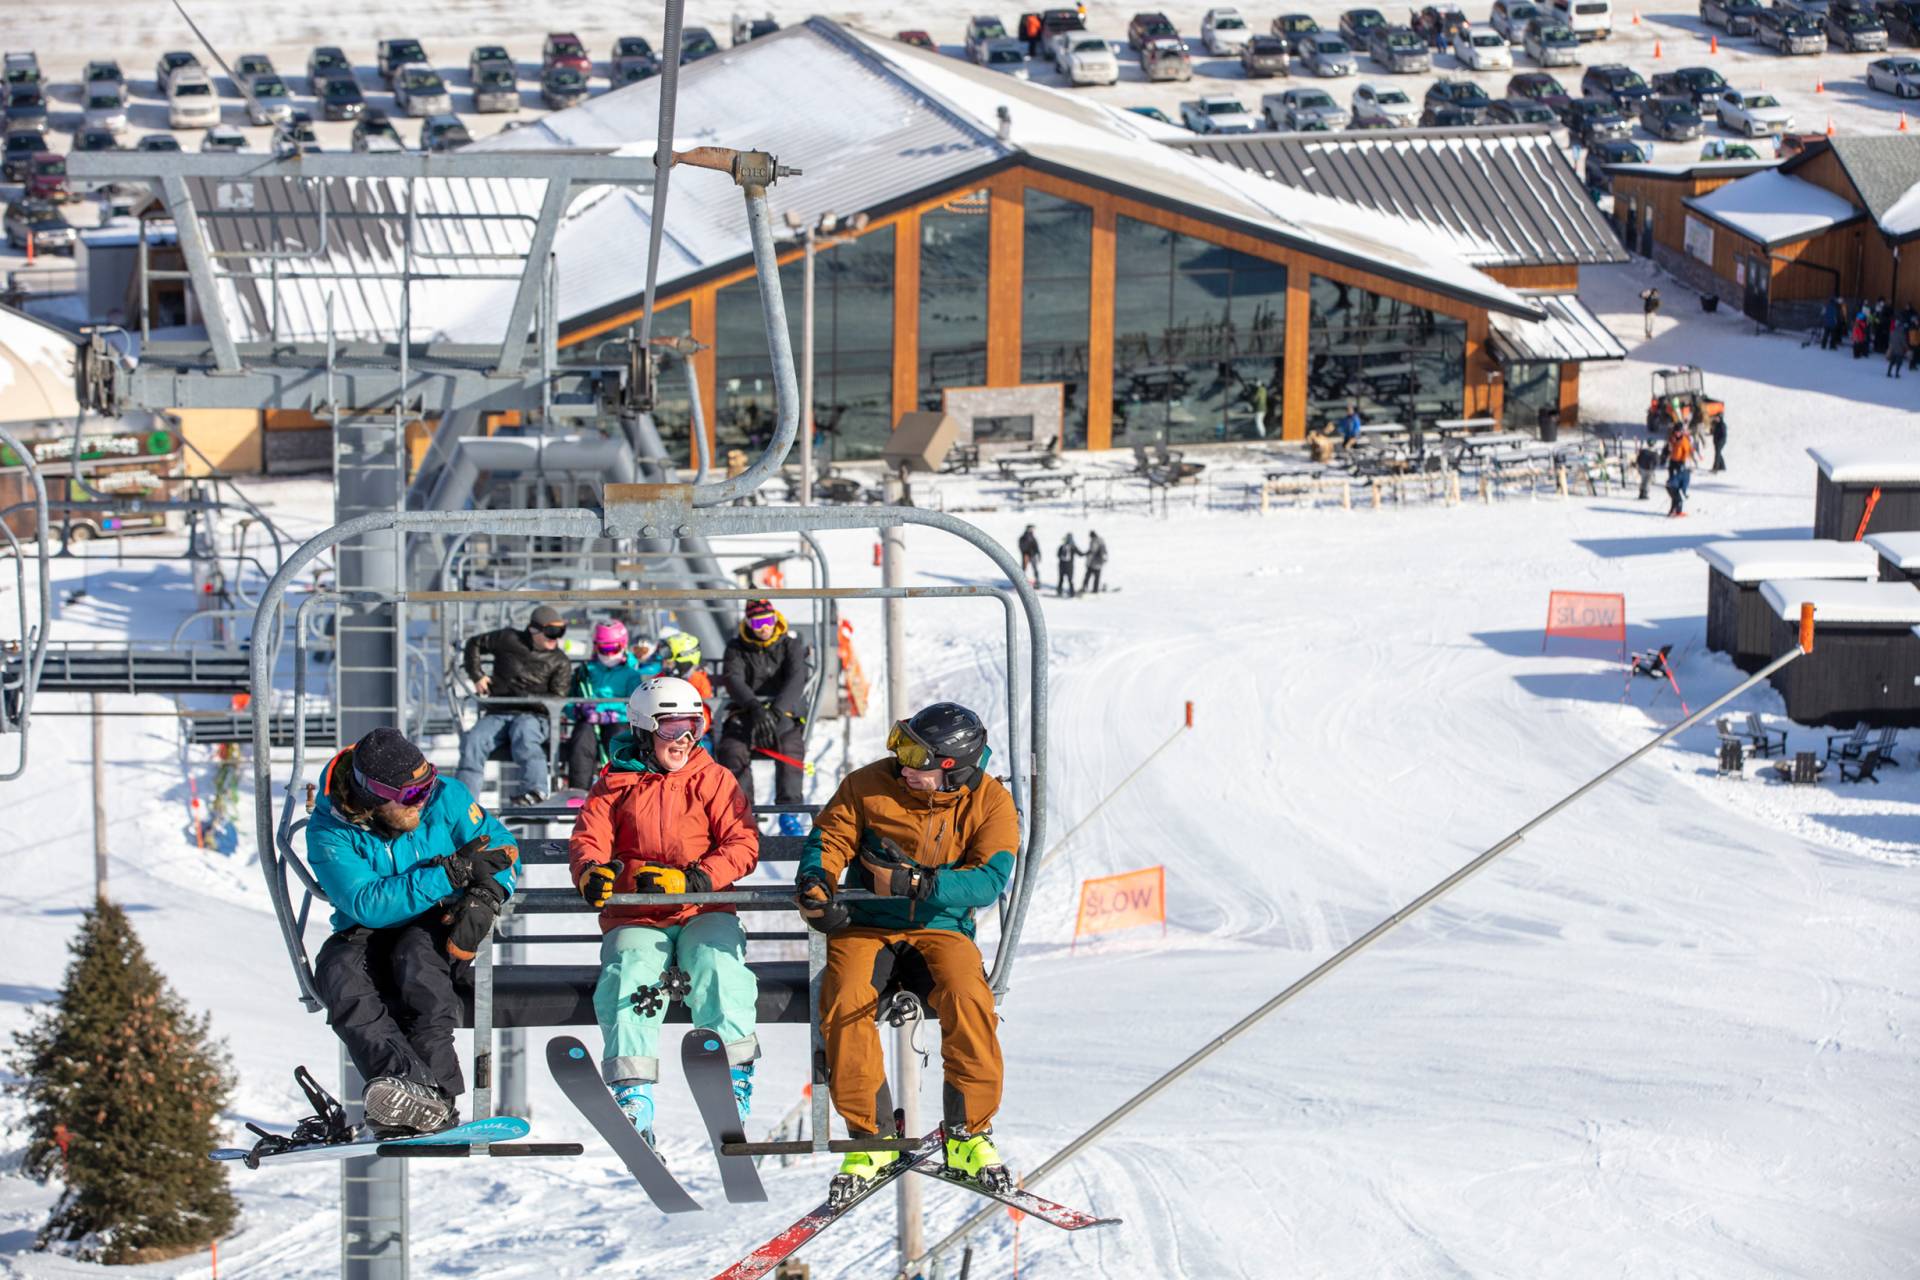 3 skiers riding on a chairlift with mountain lodge in background